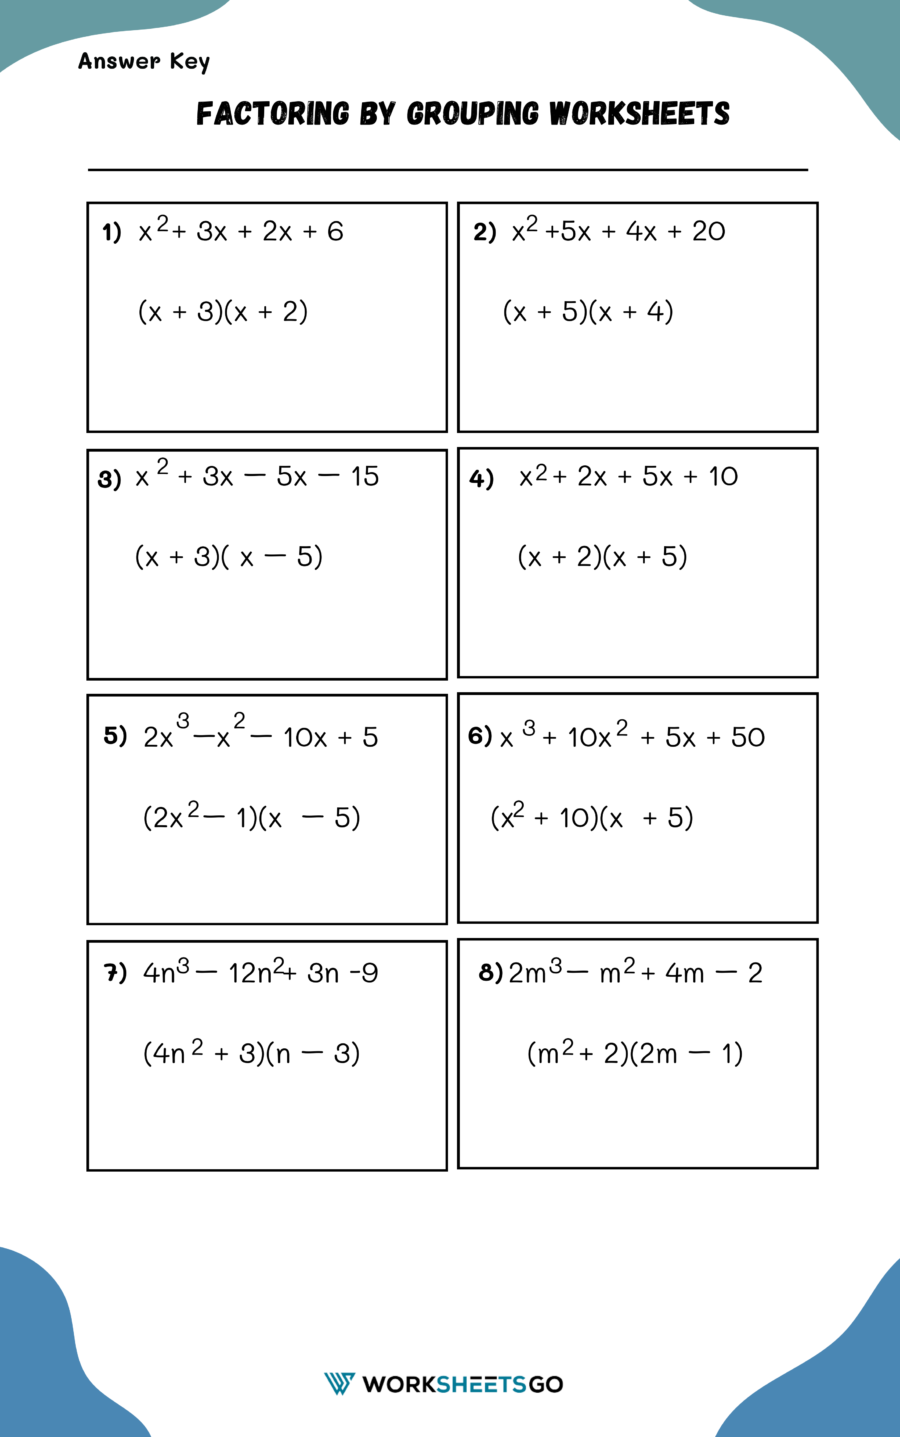 Factoring By Grouping Worksheet Answer Key